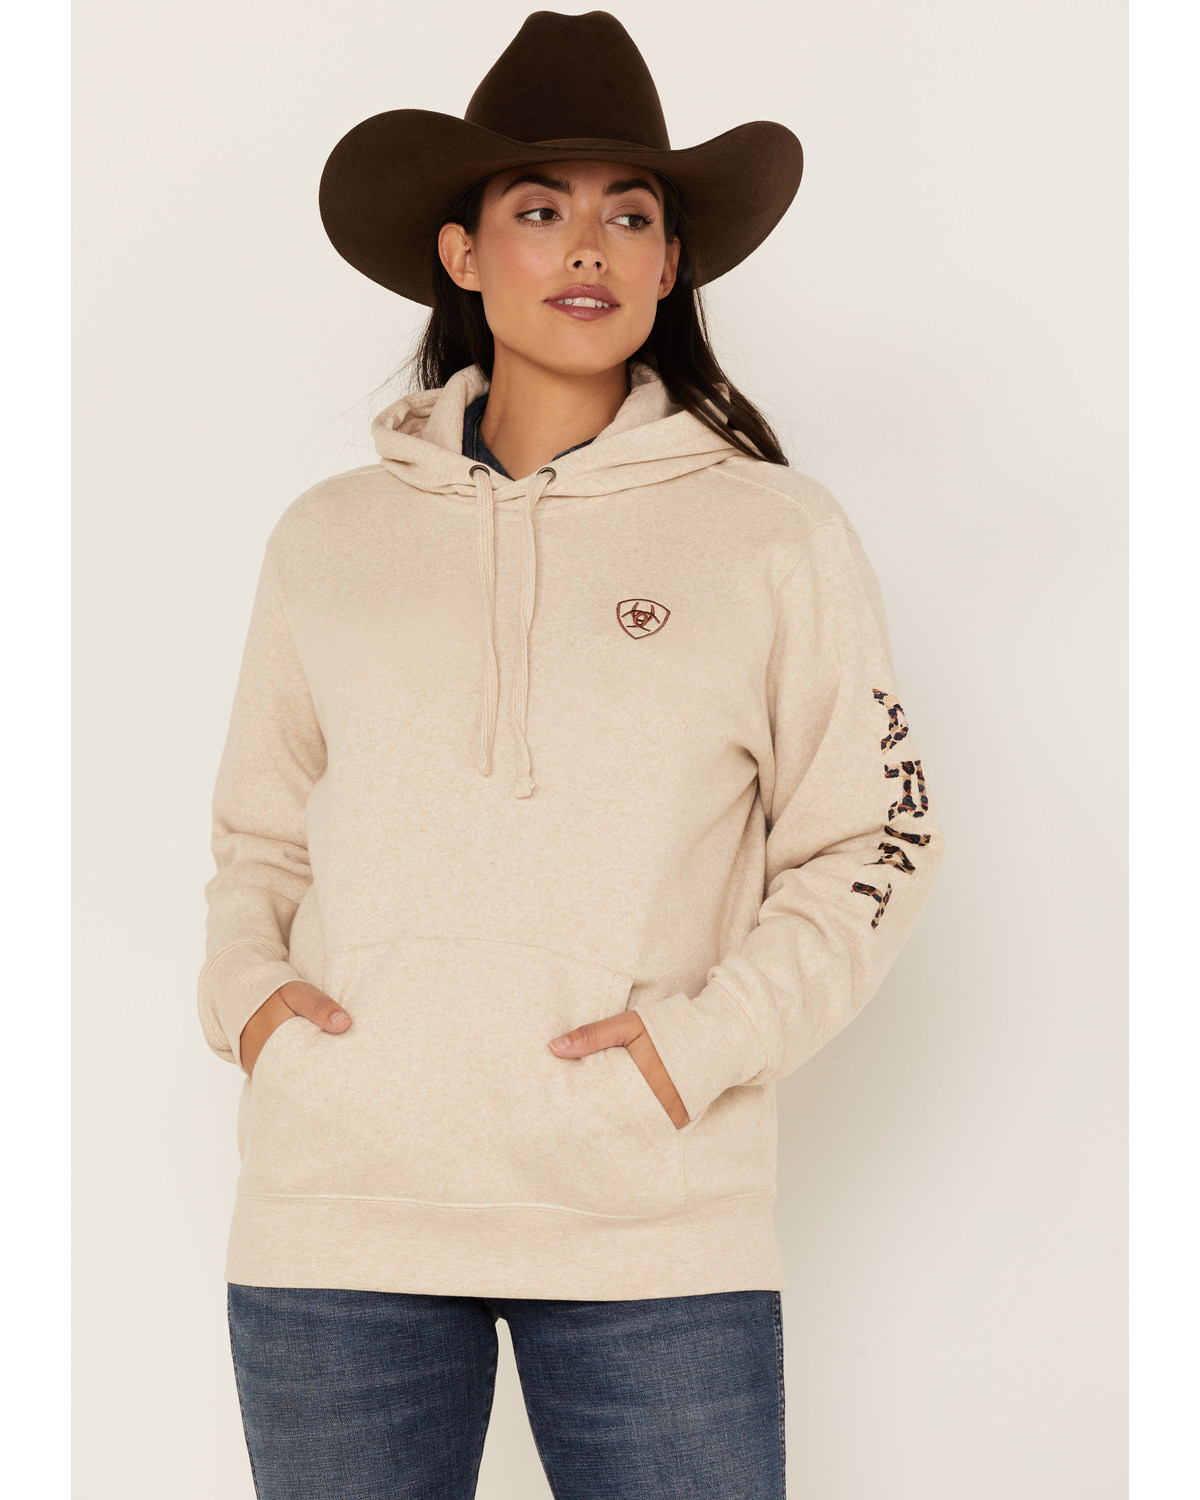 Ariat Women's Embroidered Logo Hoodie